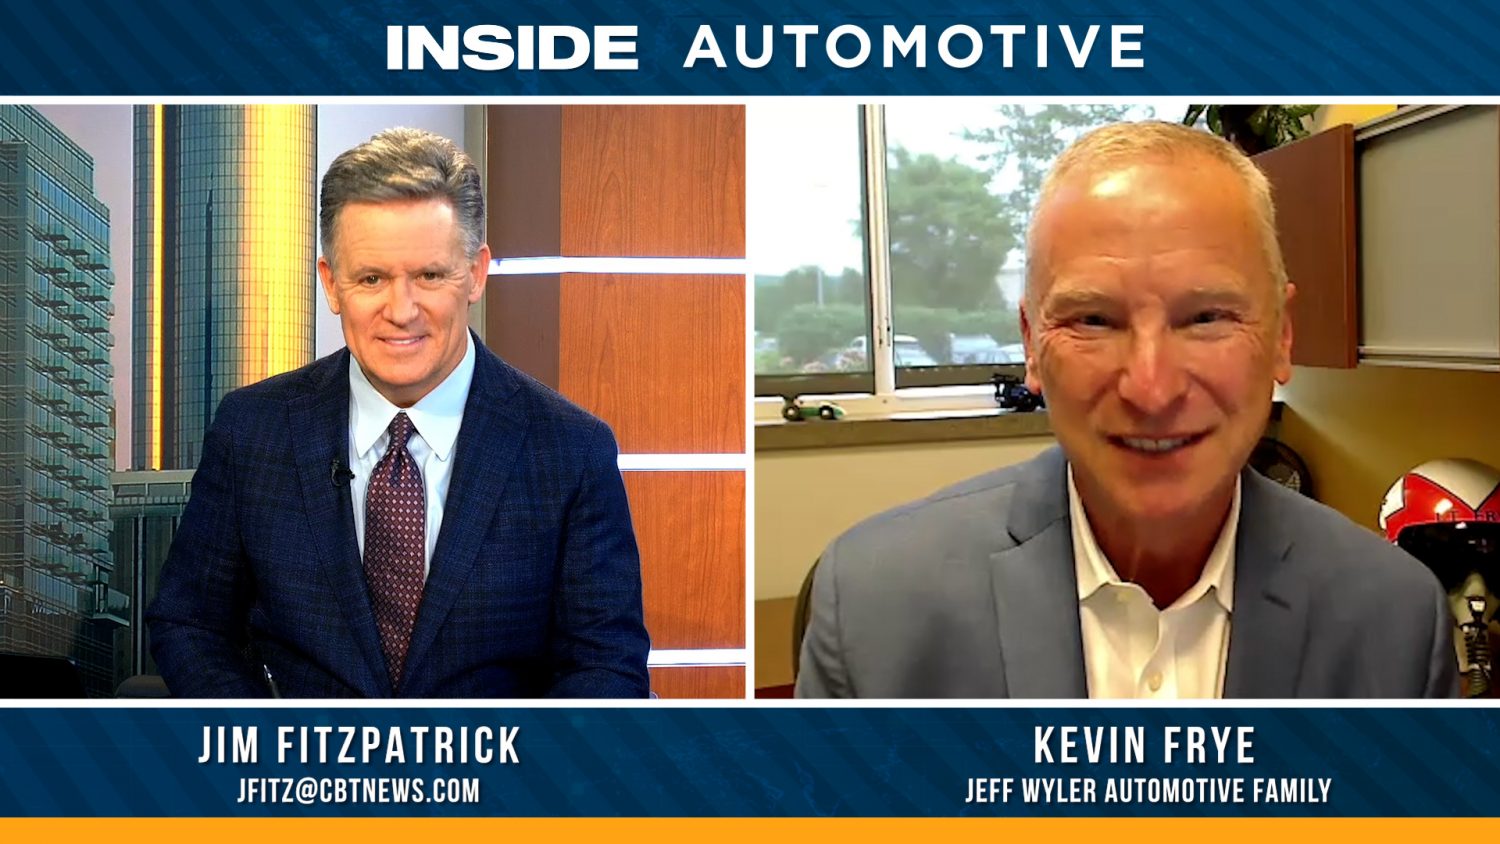 Kevin Frye will join us on today's episode of Inside Automotive to discuss how the return of inventory has ushered in a slowing market.